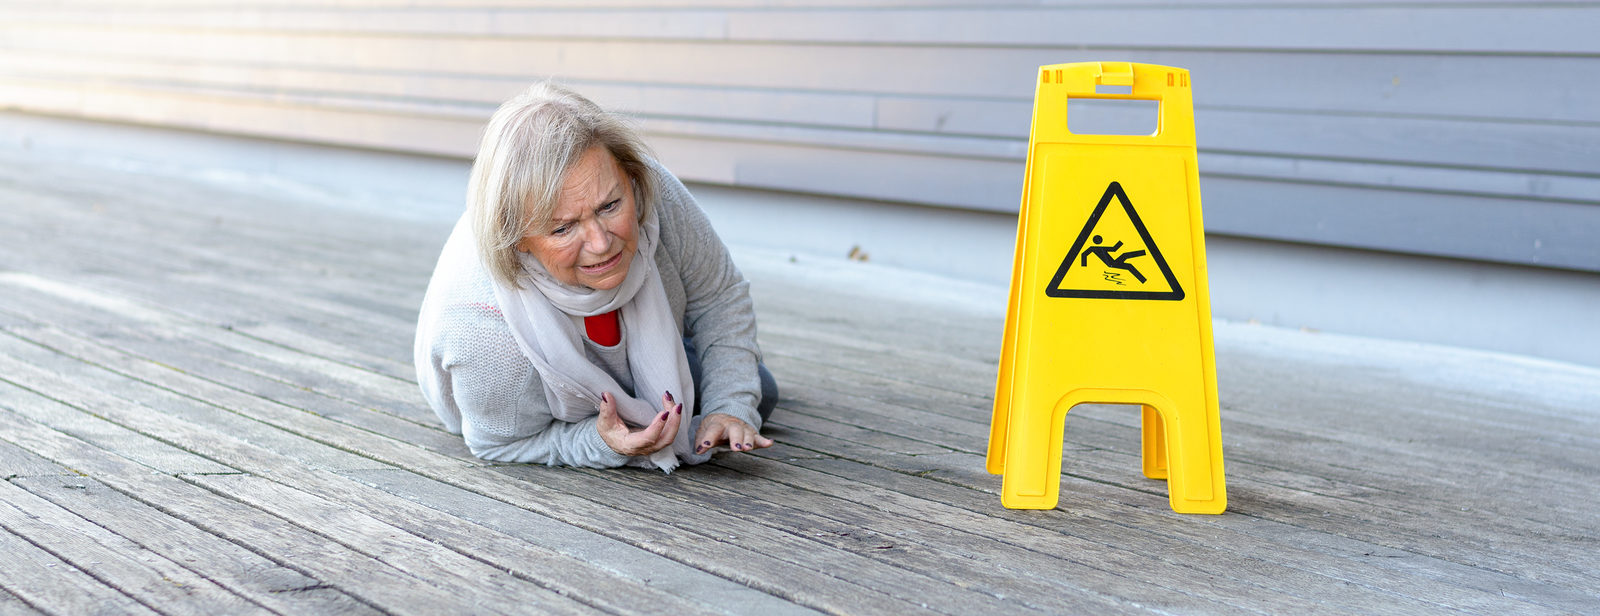 Older lady fall on wet surface - Slip and Fall Attorneys in St Paul Minnesota - Sand Law LLC